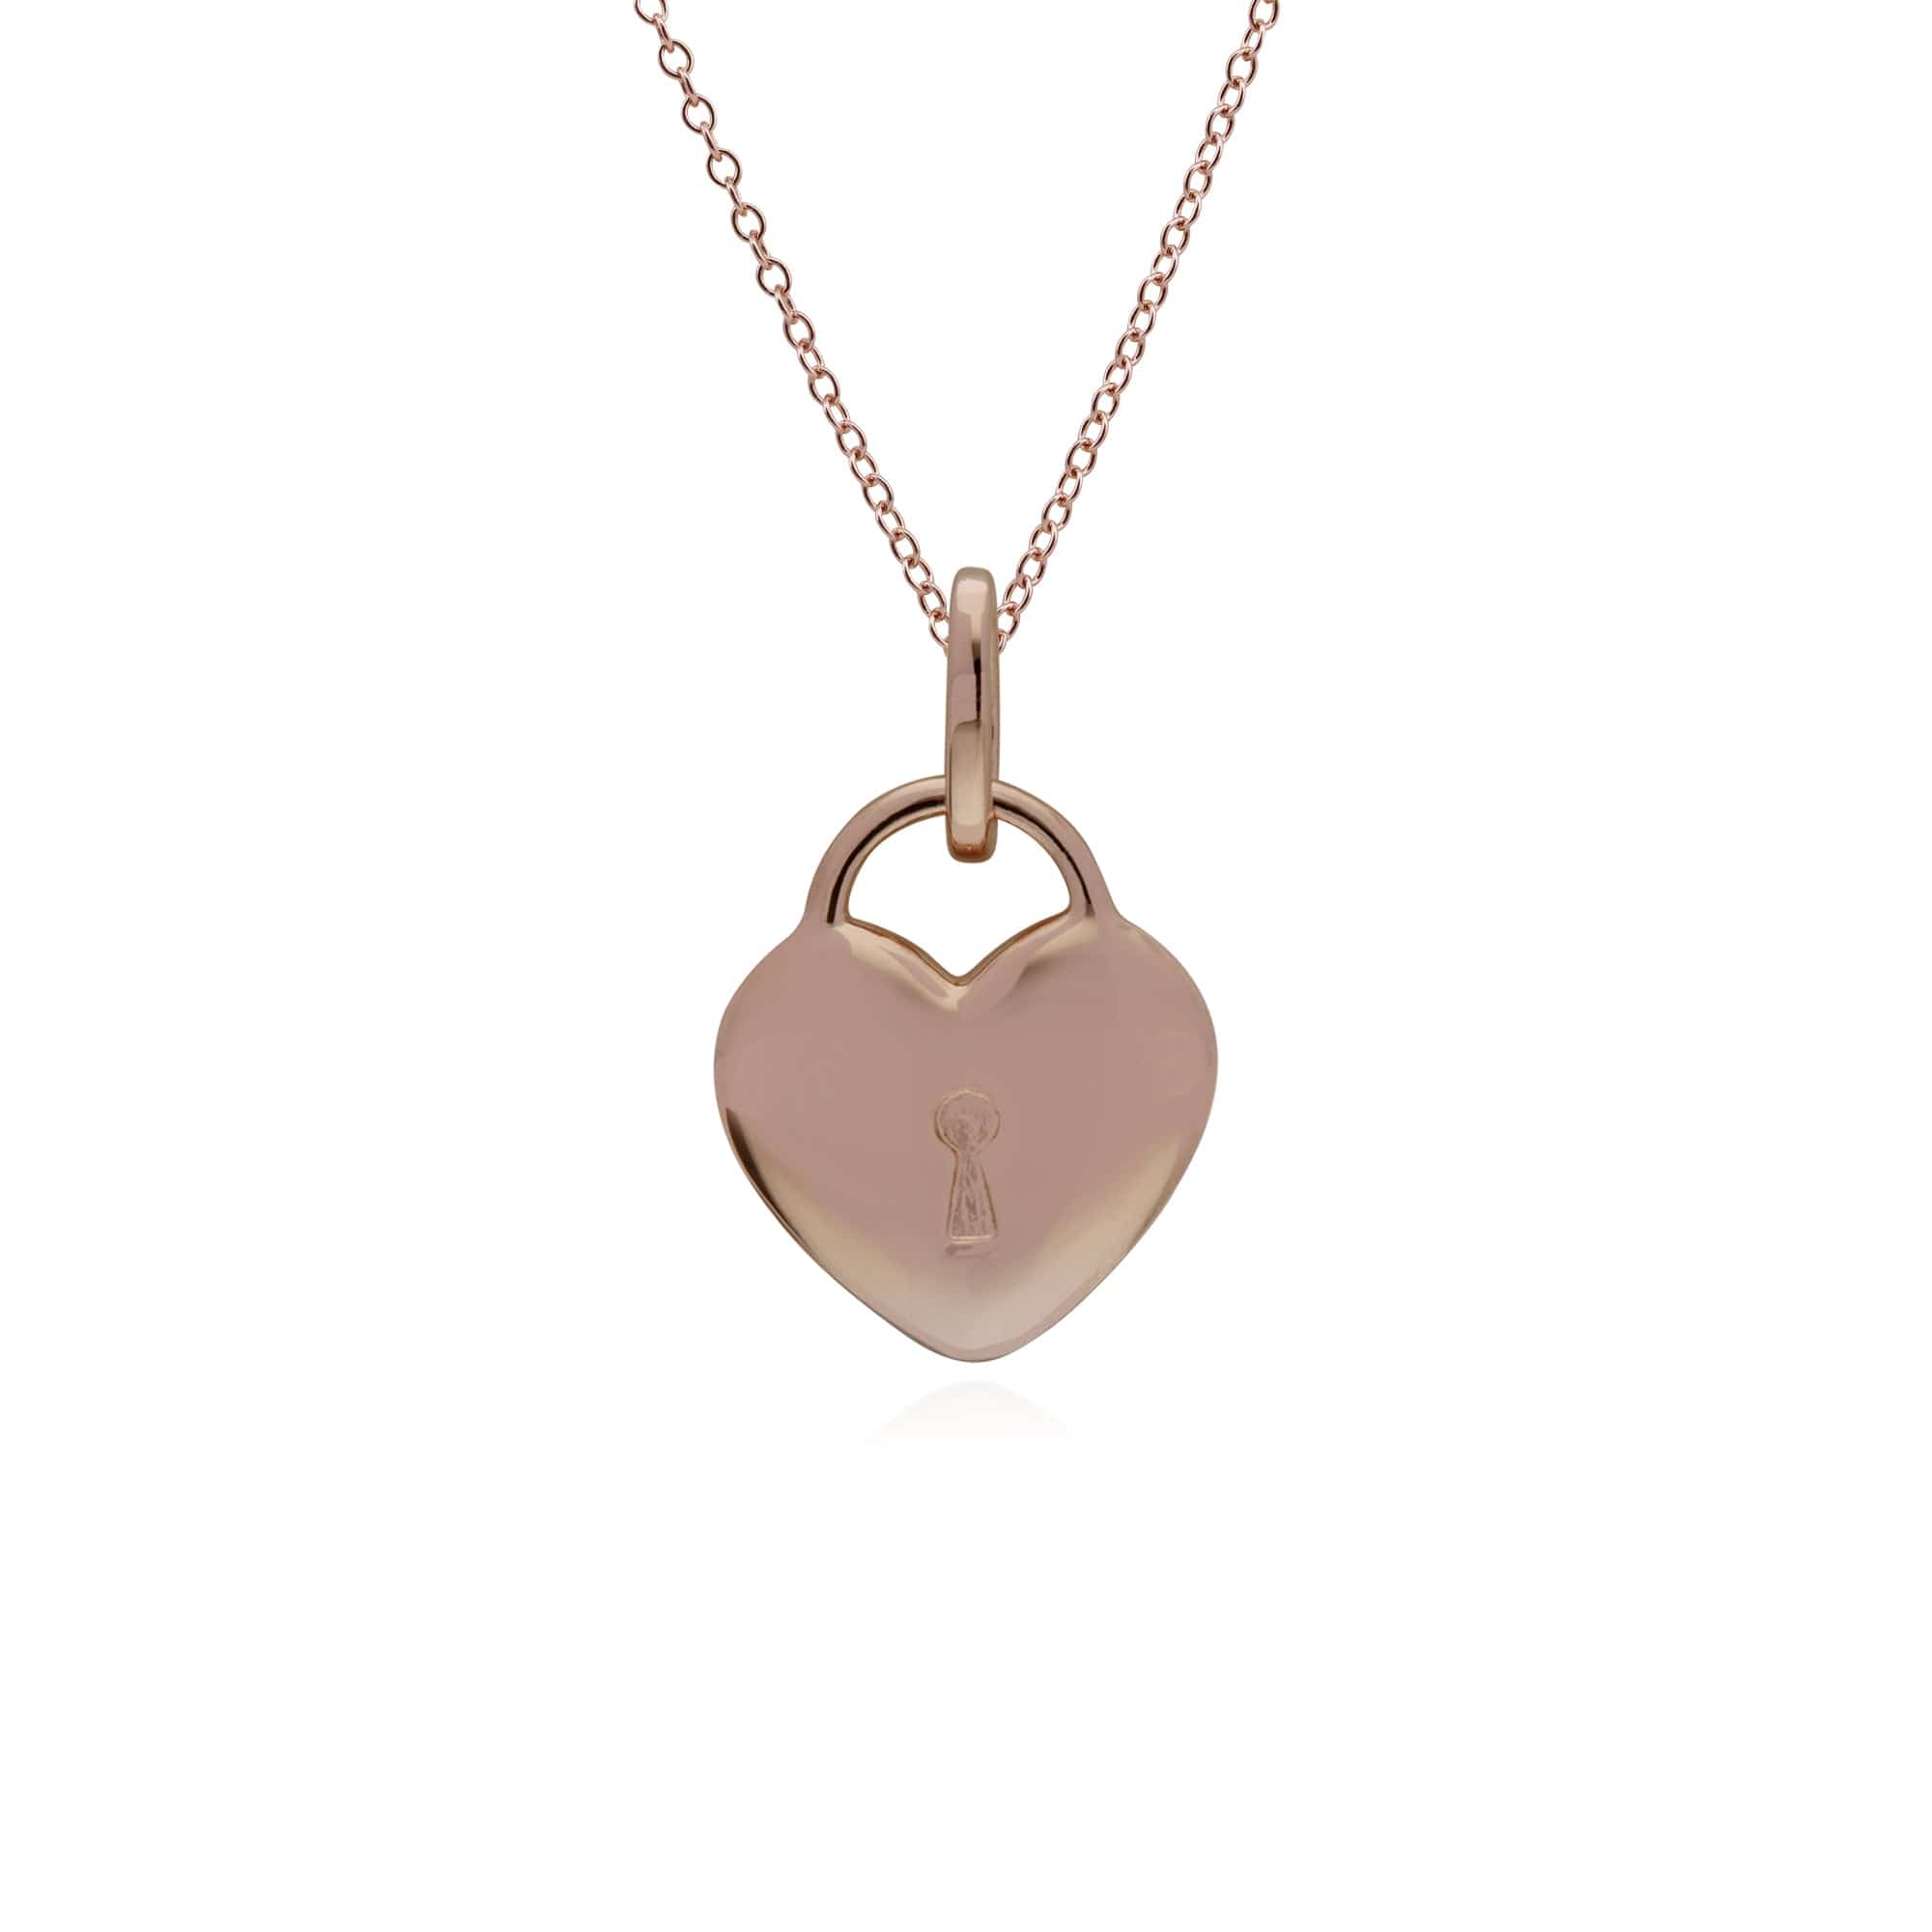 270P026712925-270P026901925 Classic Heart Lock Pendant & Jade Big Key Charm in Rose Gold Plated 925 Sterling Silver 3